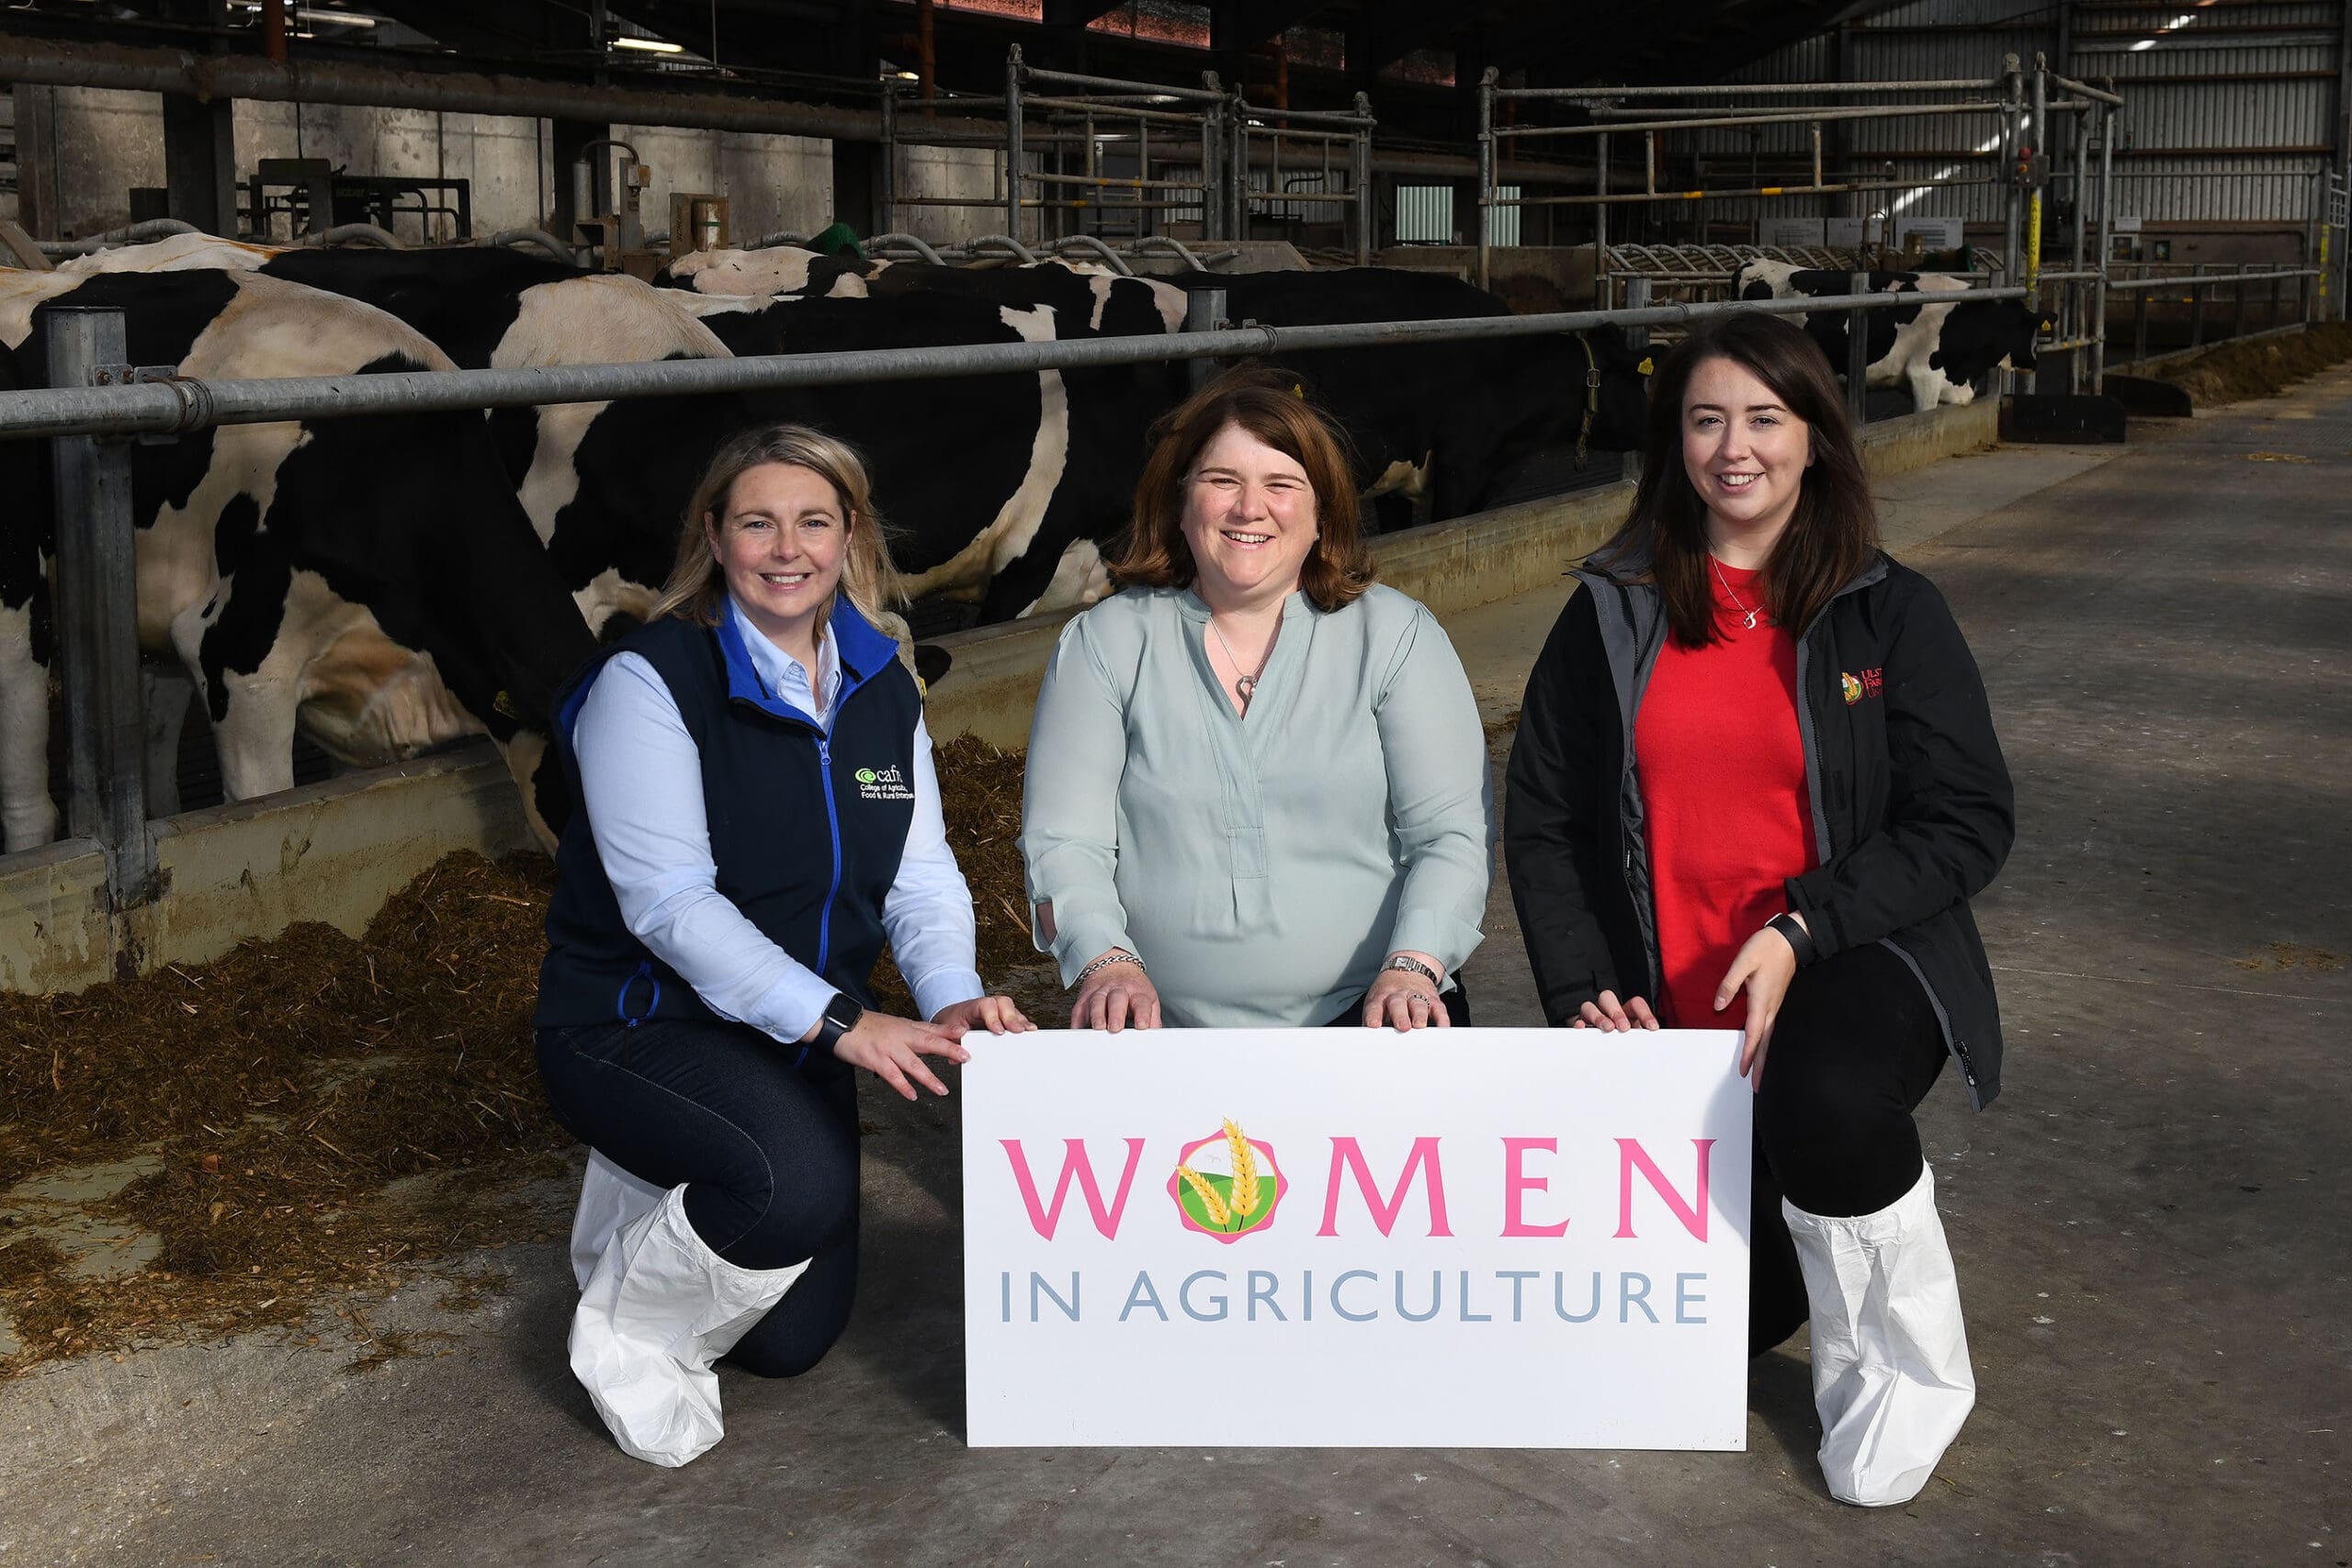 CAFRE senior dairy technologist Judith McCord, UFU rural affairs chair Denise Kelso and UFU policy officer Sarah Morell.